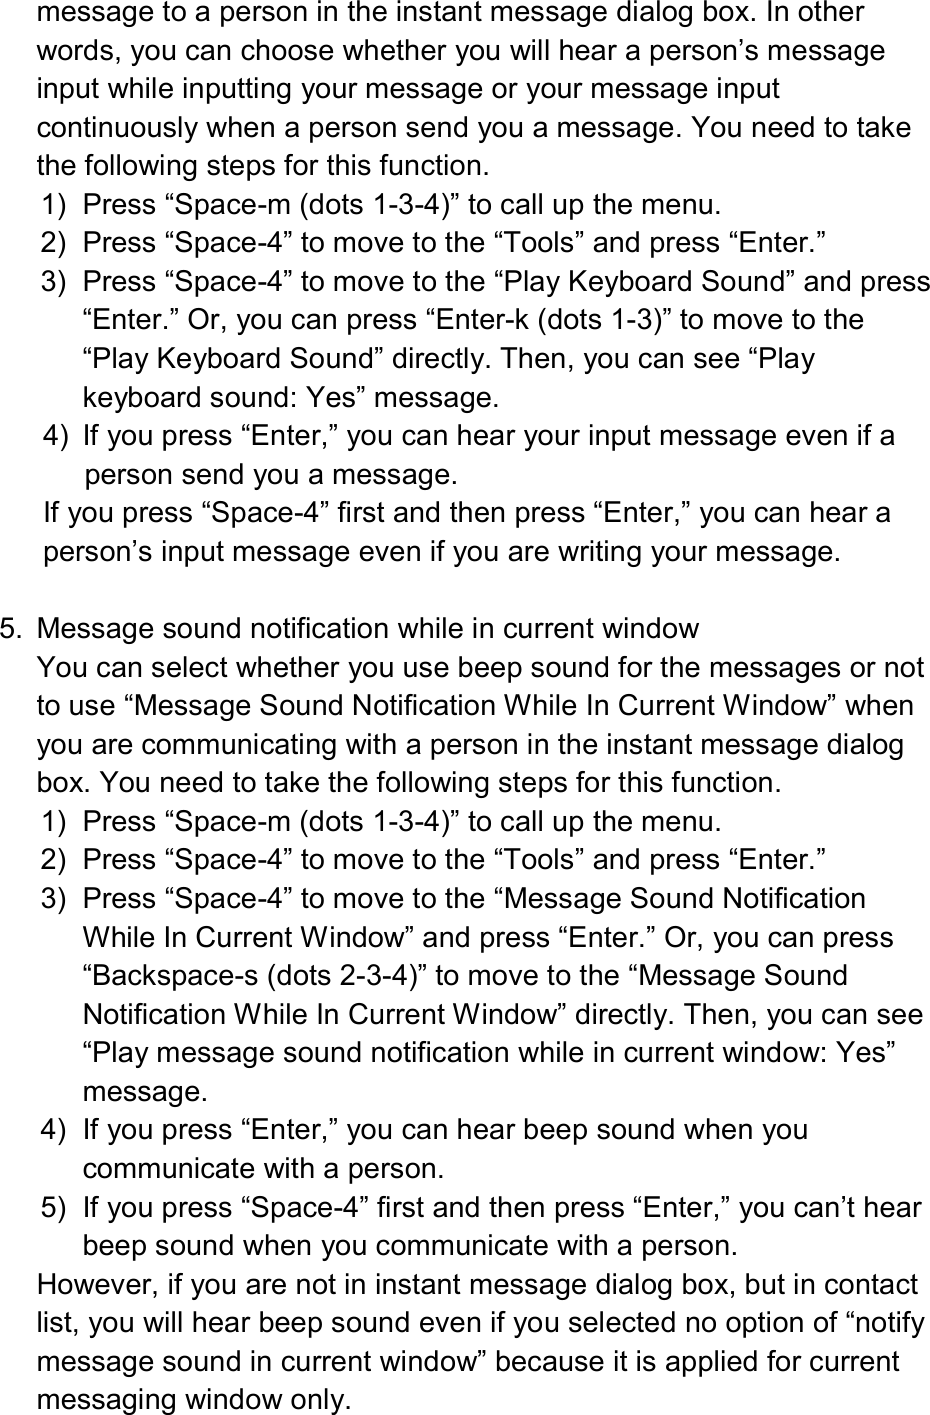  message to a person in the instant message dialog box. In other words, you can choose whether you will hear a person’s message input while inputting your message or your message input continuously when a person send you a message. You need to take the following steps for this function. 1)  Press “Space-m (dots 1-3-4)” to call up the menu. 2)  Press “Space-4” to move to the “Tools” and press “Enter.” 3)  Press “Space-4” to move to the “Play Keyboard Sound” and press “Enter.” Or, you can press “Enter-k (dots 1-3)” to move to the “Play Keyboard Sound” directly. Then, you can see “Play keyboard sound: Yes” message. 4)  If you press “Enter,” you can hear your input message even if a person send you a message. If you press “Space-4” first and then press “Enter,” you can hear a person’s input message even if you are writing your message.  5.  Message sound notification while in current window You can select whether you use beep sound for the messages or not to use “Message Sound Notification While In Current Window” when you are communicating with a person in the instant message dialog box. You need to take the following steps for this function. 1)  Press “Space-m (dots 1-3-4)” to call up the menu. 2)  Press “Space-4” to move to the “Tools” and press “Enter.” 3)  Press “Space-4” to move to the “Message Sound Notification While In Current Window” and press “Enter.” Or, you can press “Backspace-s (dots 2-3-4)” to move to the “Message Sound Notification While In Current Window” directly. Then, you can see “Play message sound notification while in current window: Yes” message. 4)  If you press “Enter,” you can hear beep sound when you communicate with a person. 5)  If you press “Space-4” first and then press “Enter,” you can’t hear beep sound when you communicate with a person. However, if you are not in instant message dialog box, but in contact list, you will hear beep sound even if you selected no option of “notify message sound in current window” because it is applied for current messaging window only. 